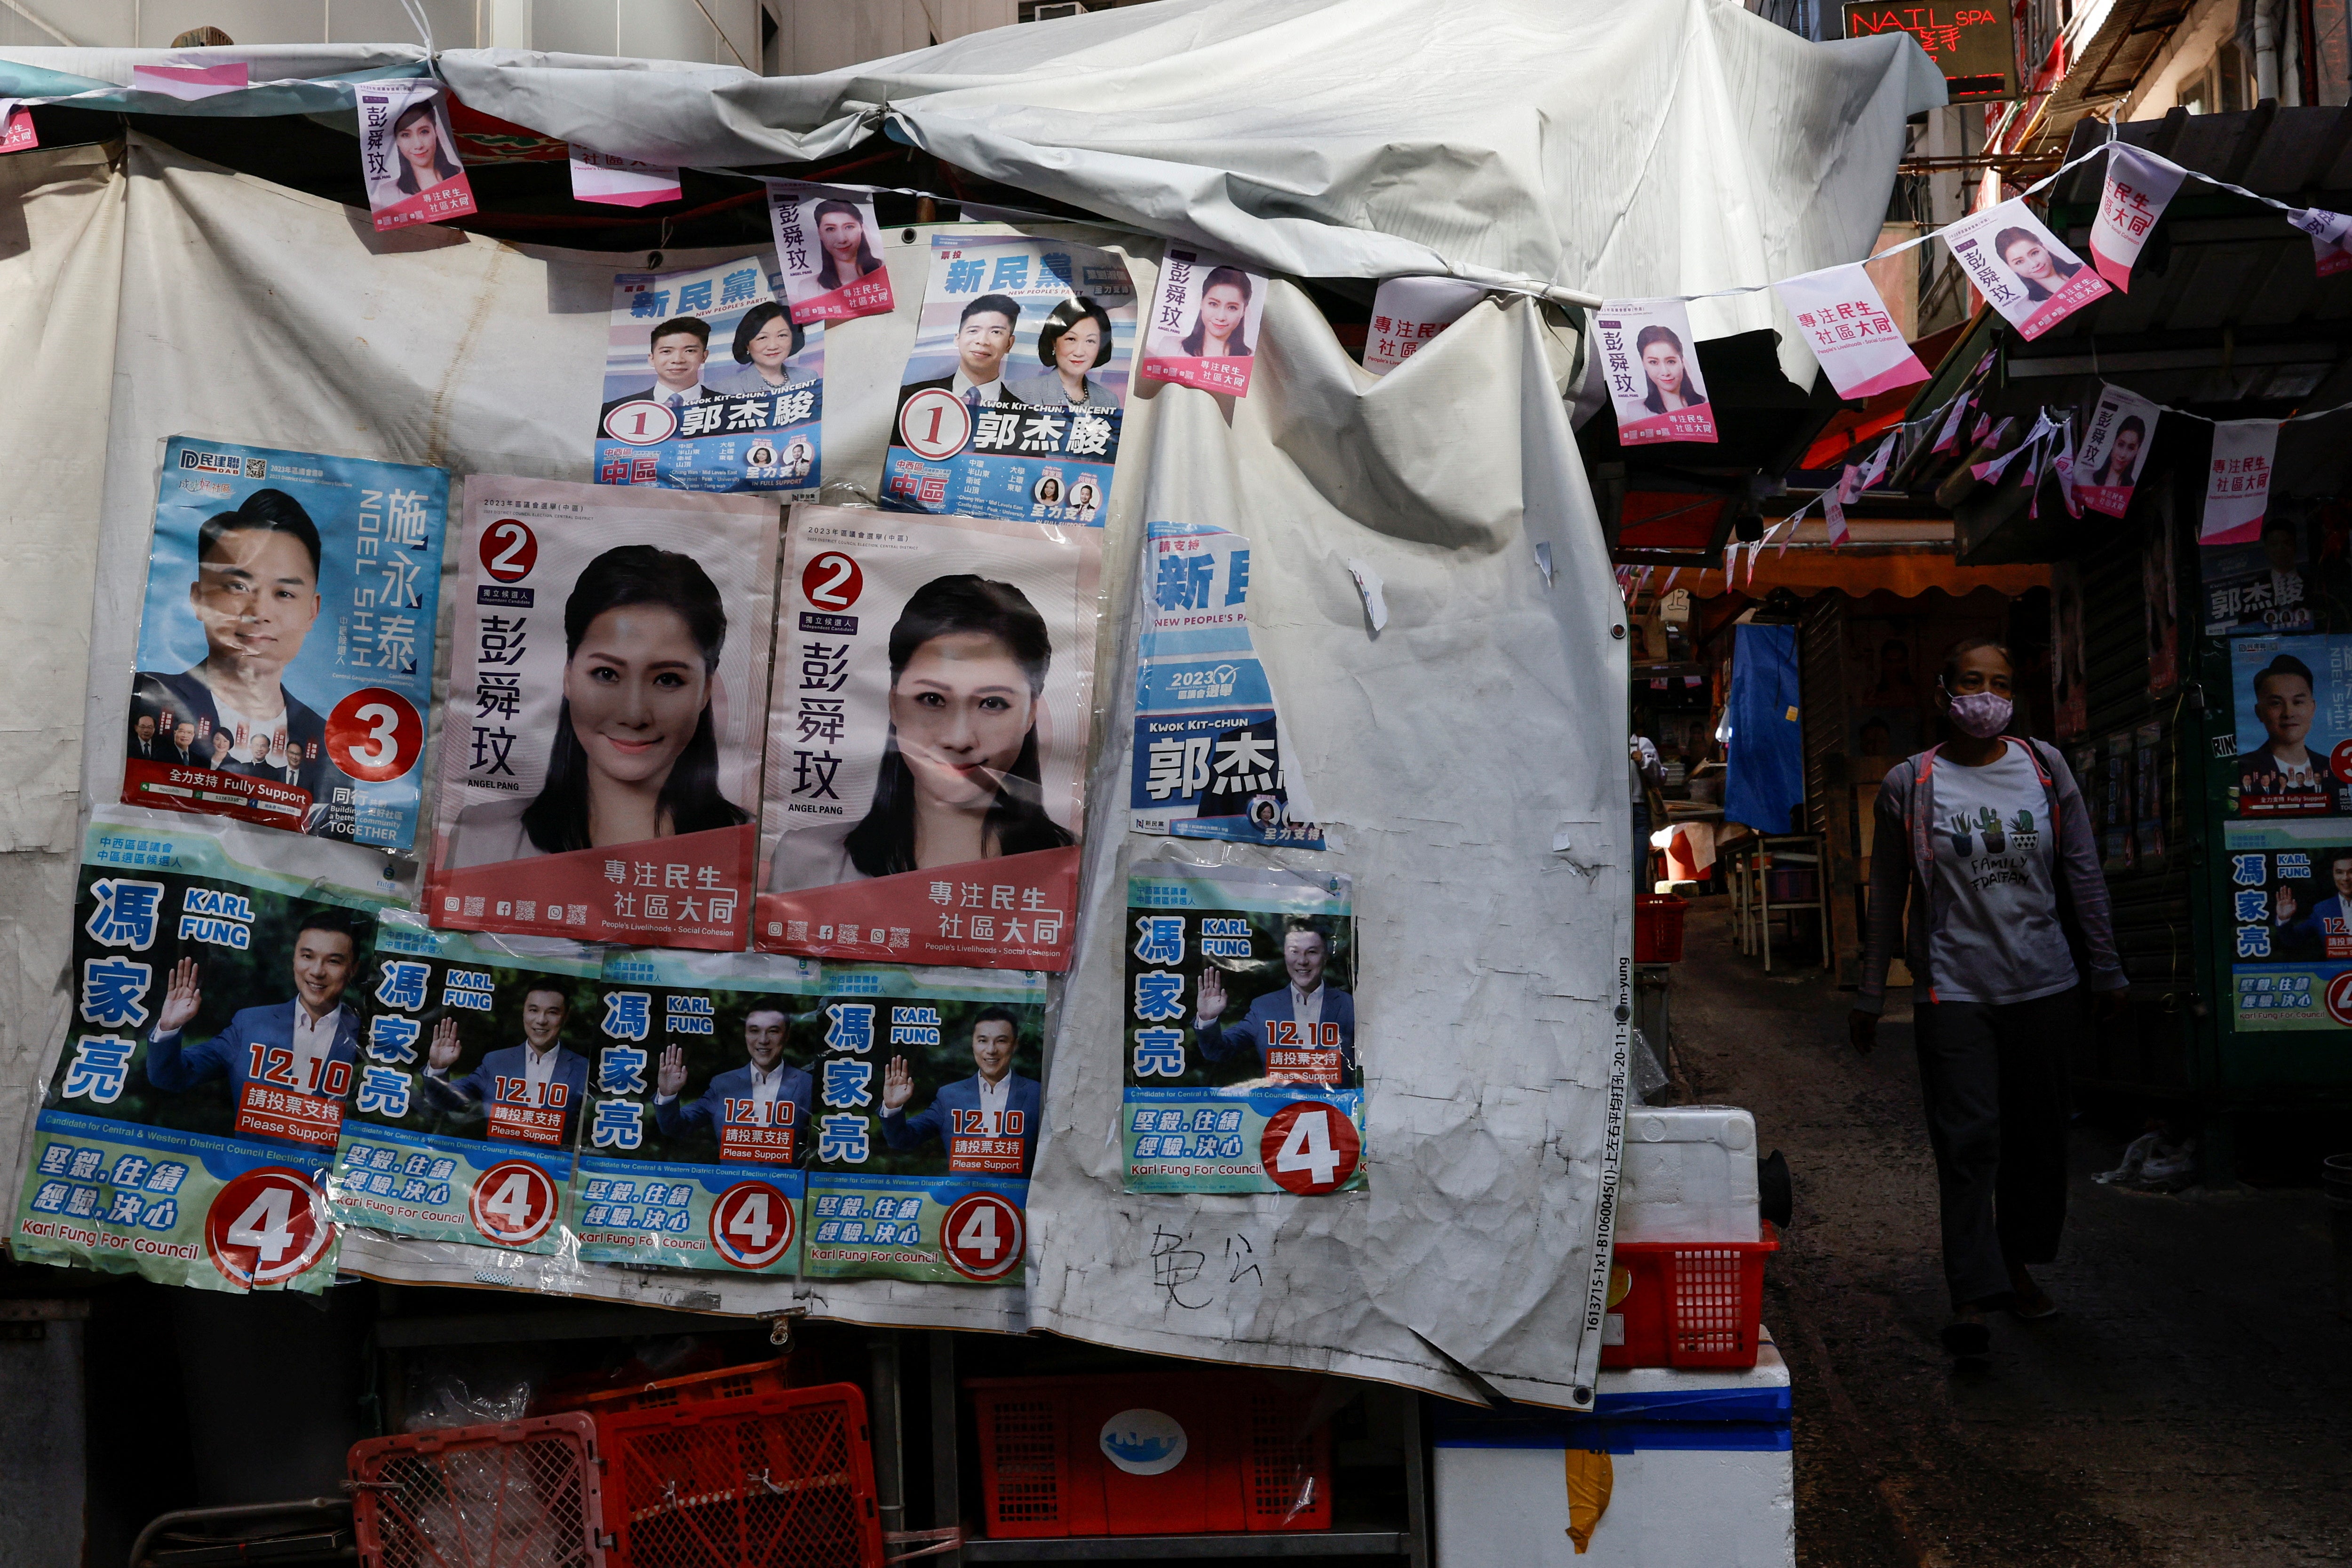 A woman walks past a stall with campaign posters of the District Council election candidates, in Hong Kong